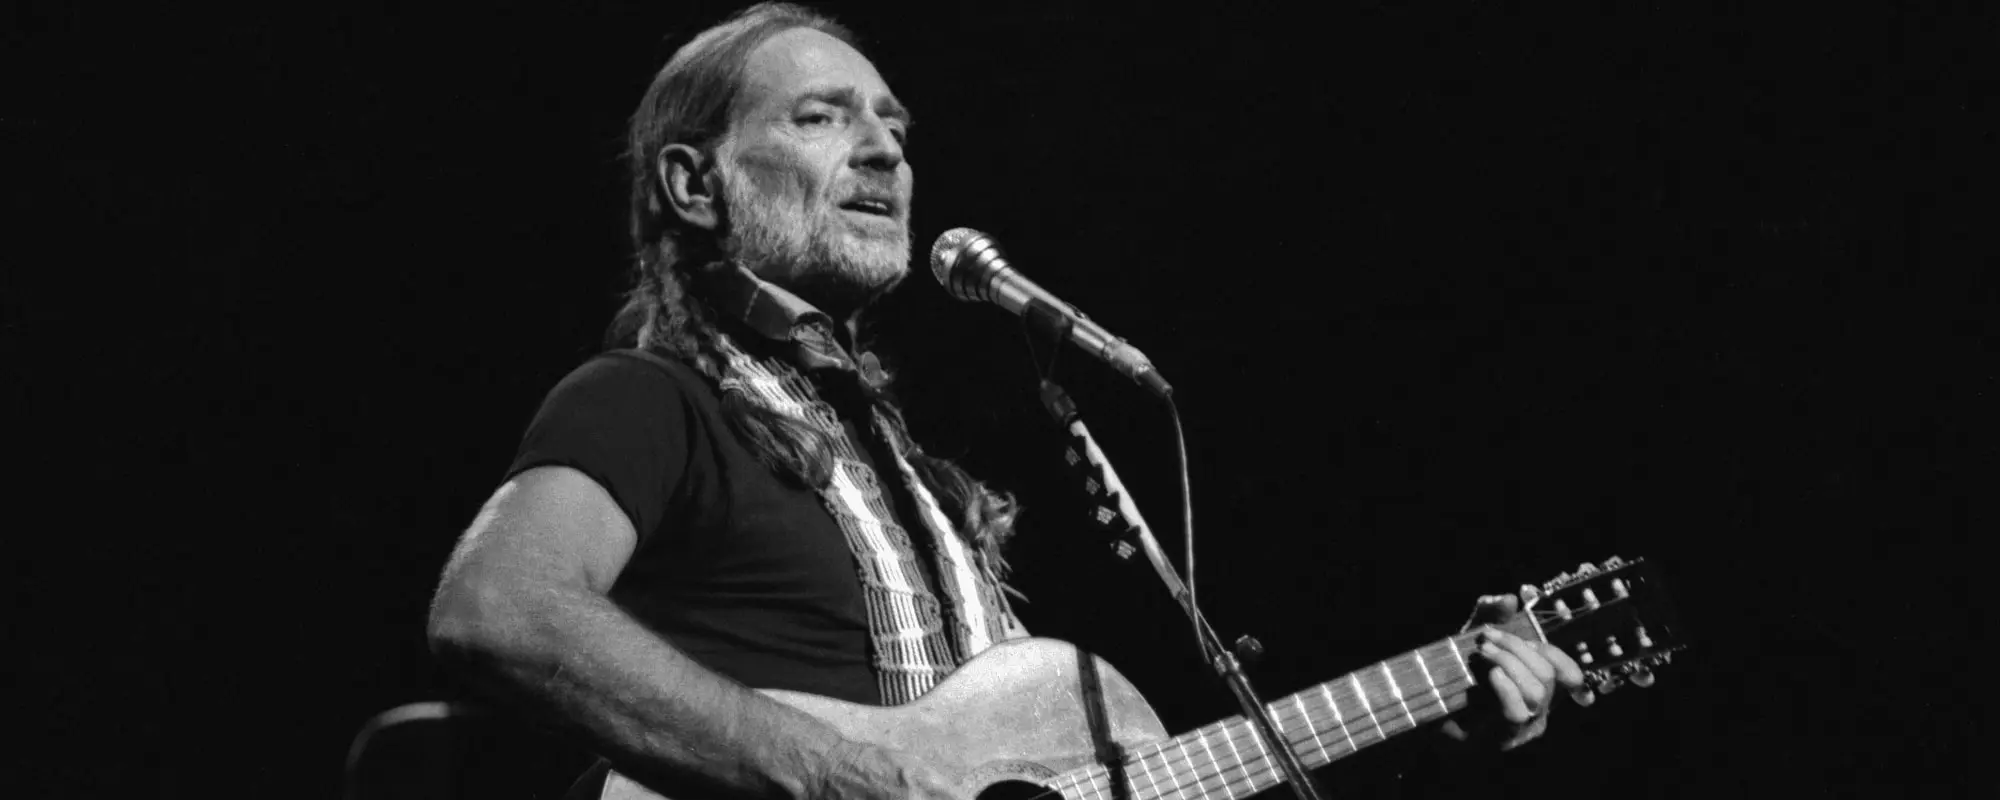 The Wild Story Behind “Shotgun Willie”: The Song that Made Willie Nelson an Outlaw Country Originator